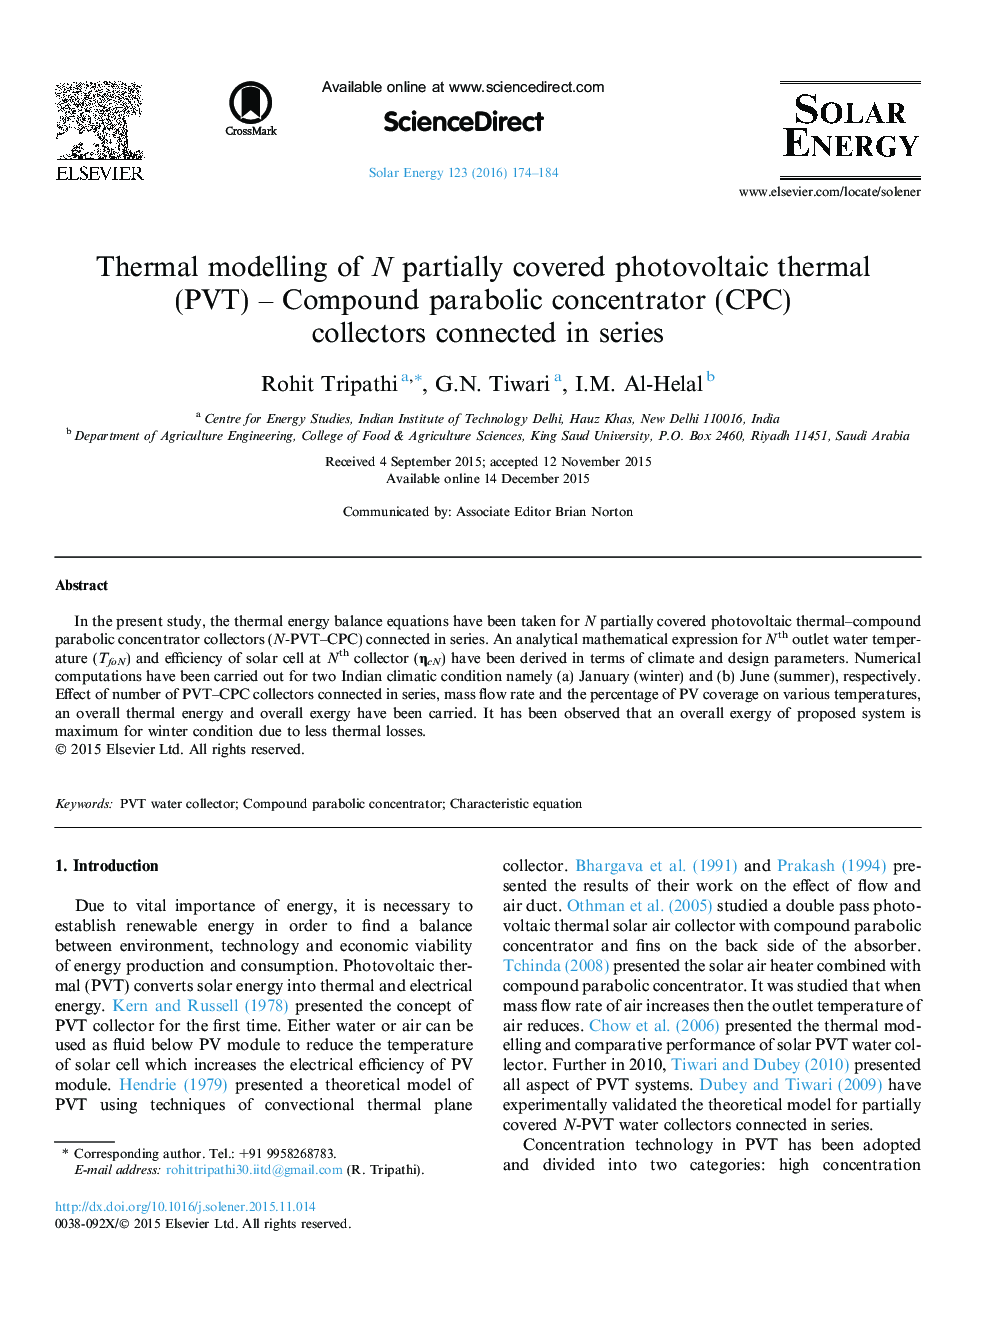 Thermal modelling of N partially covered photovoltaic thermal (PVT) – Compound parabolic concentrator (CPC) collectors connected in series